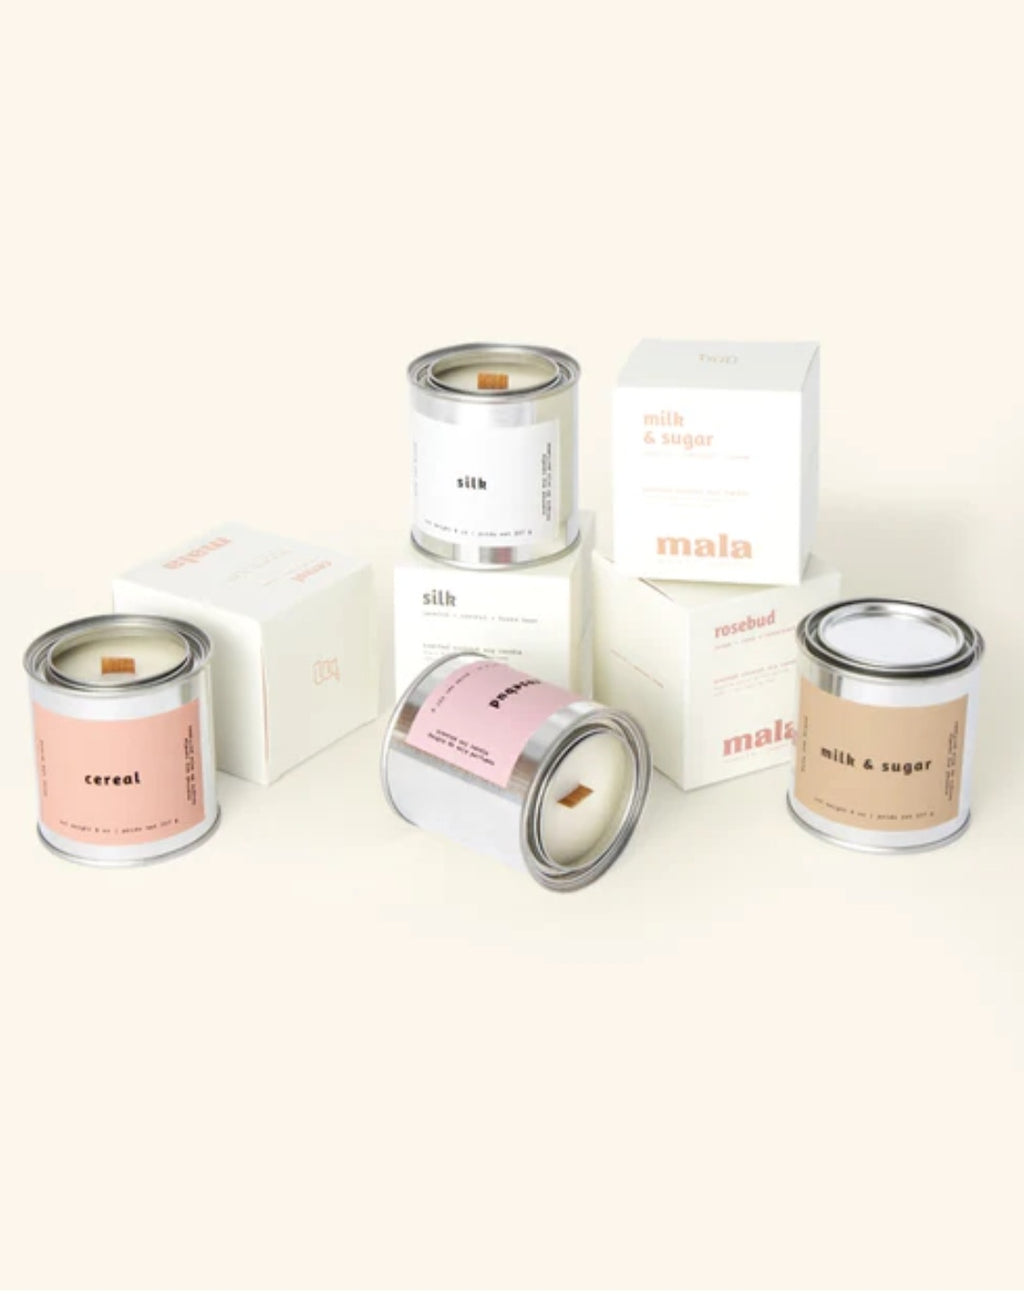 Candles by Mala The Brand